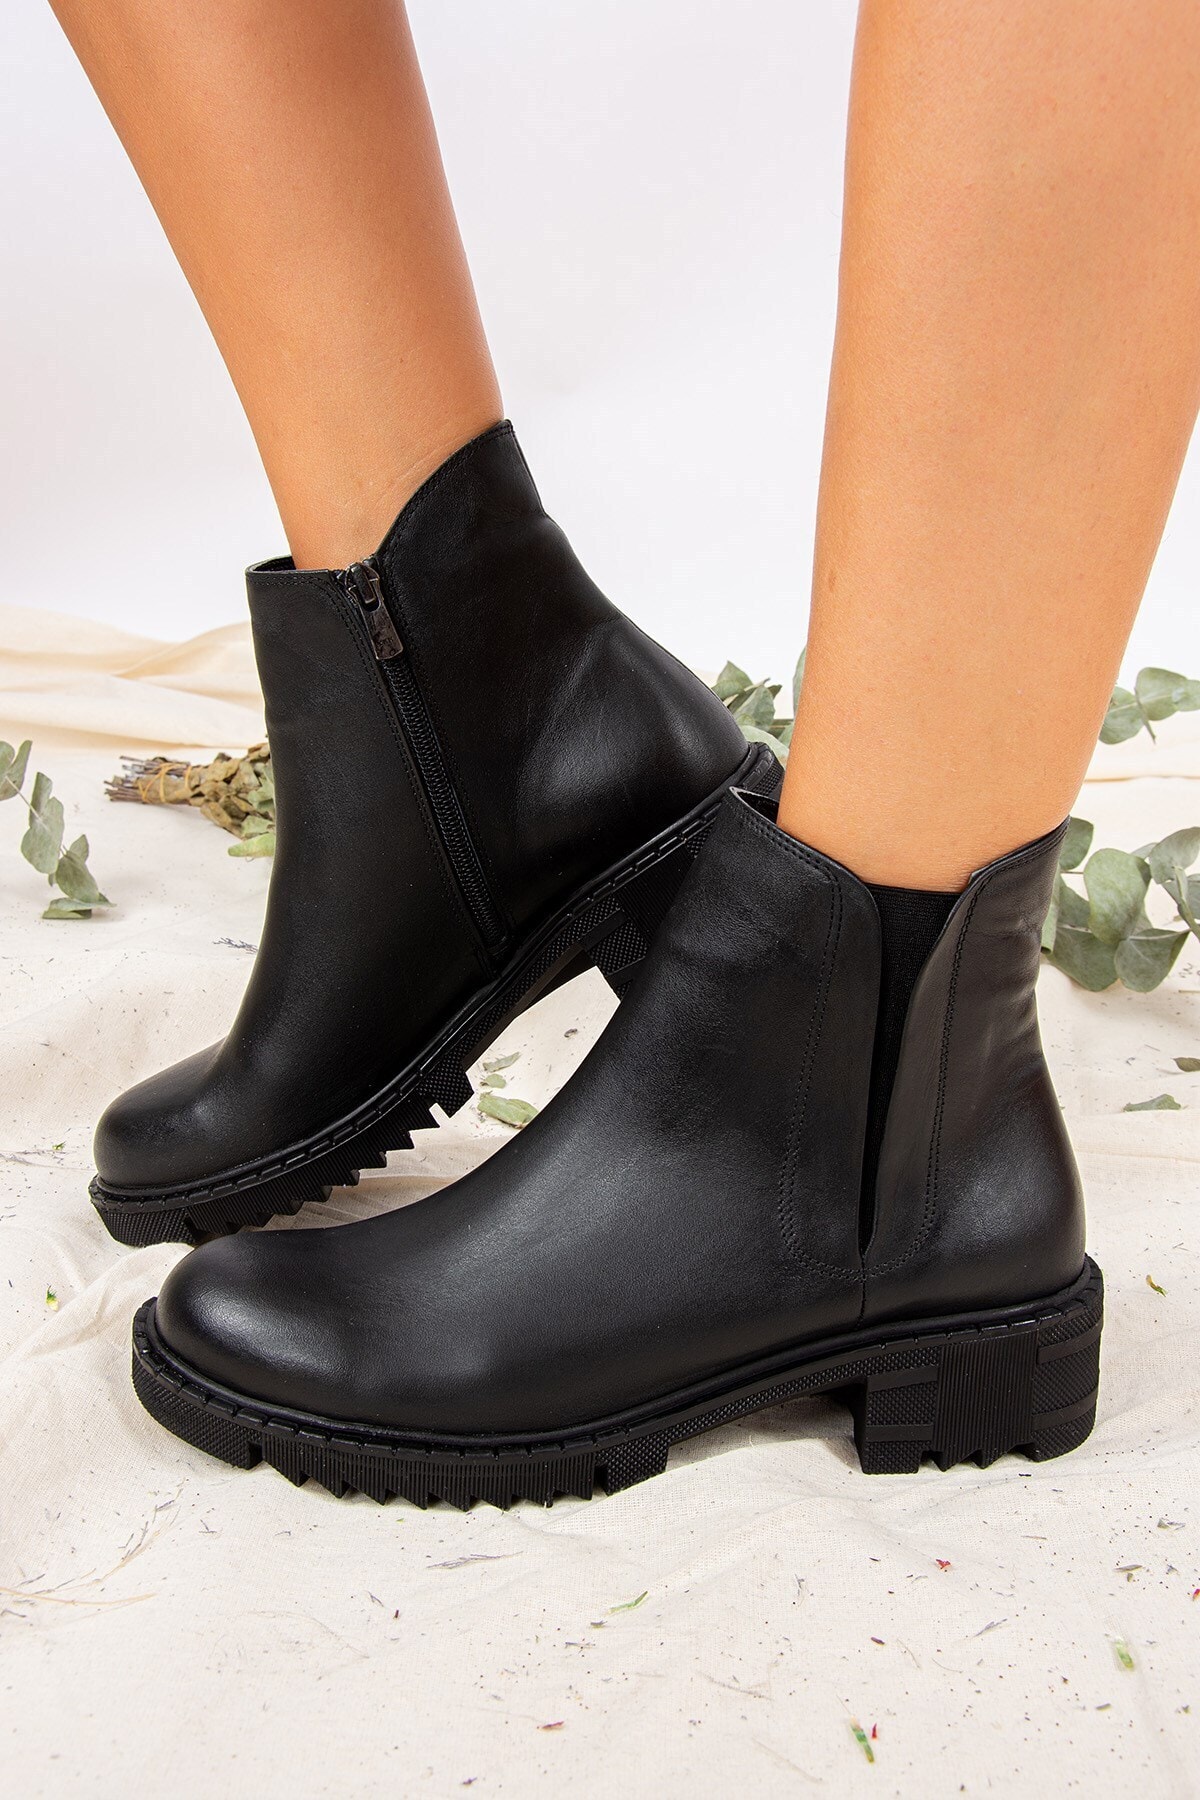 Fox Shoes Black Genuine Leather Women's Boots